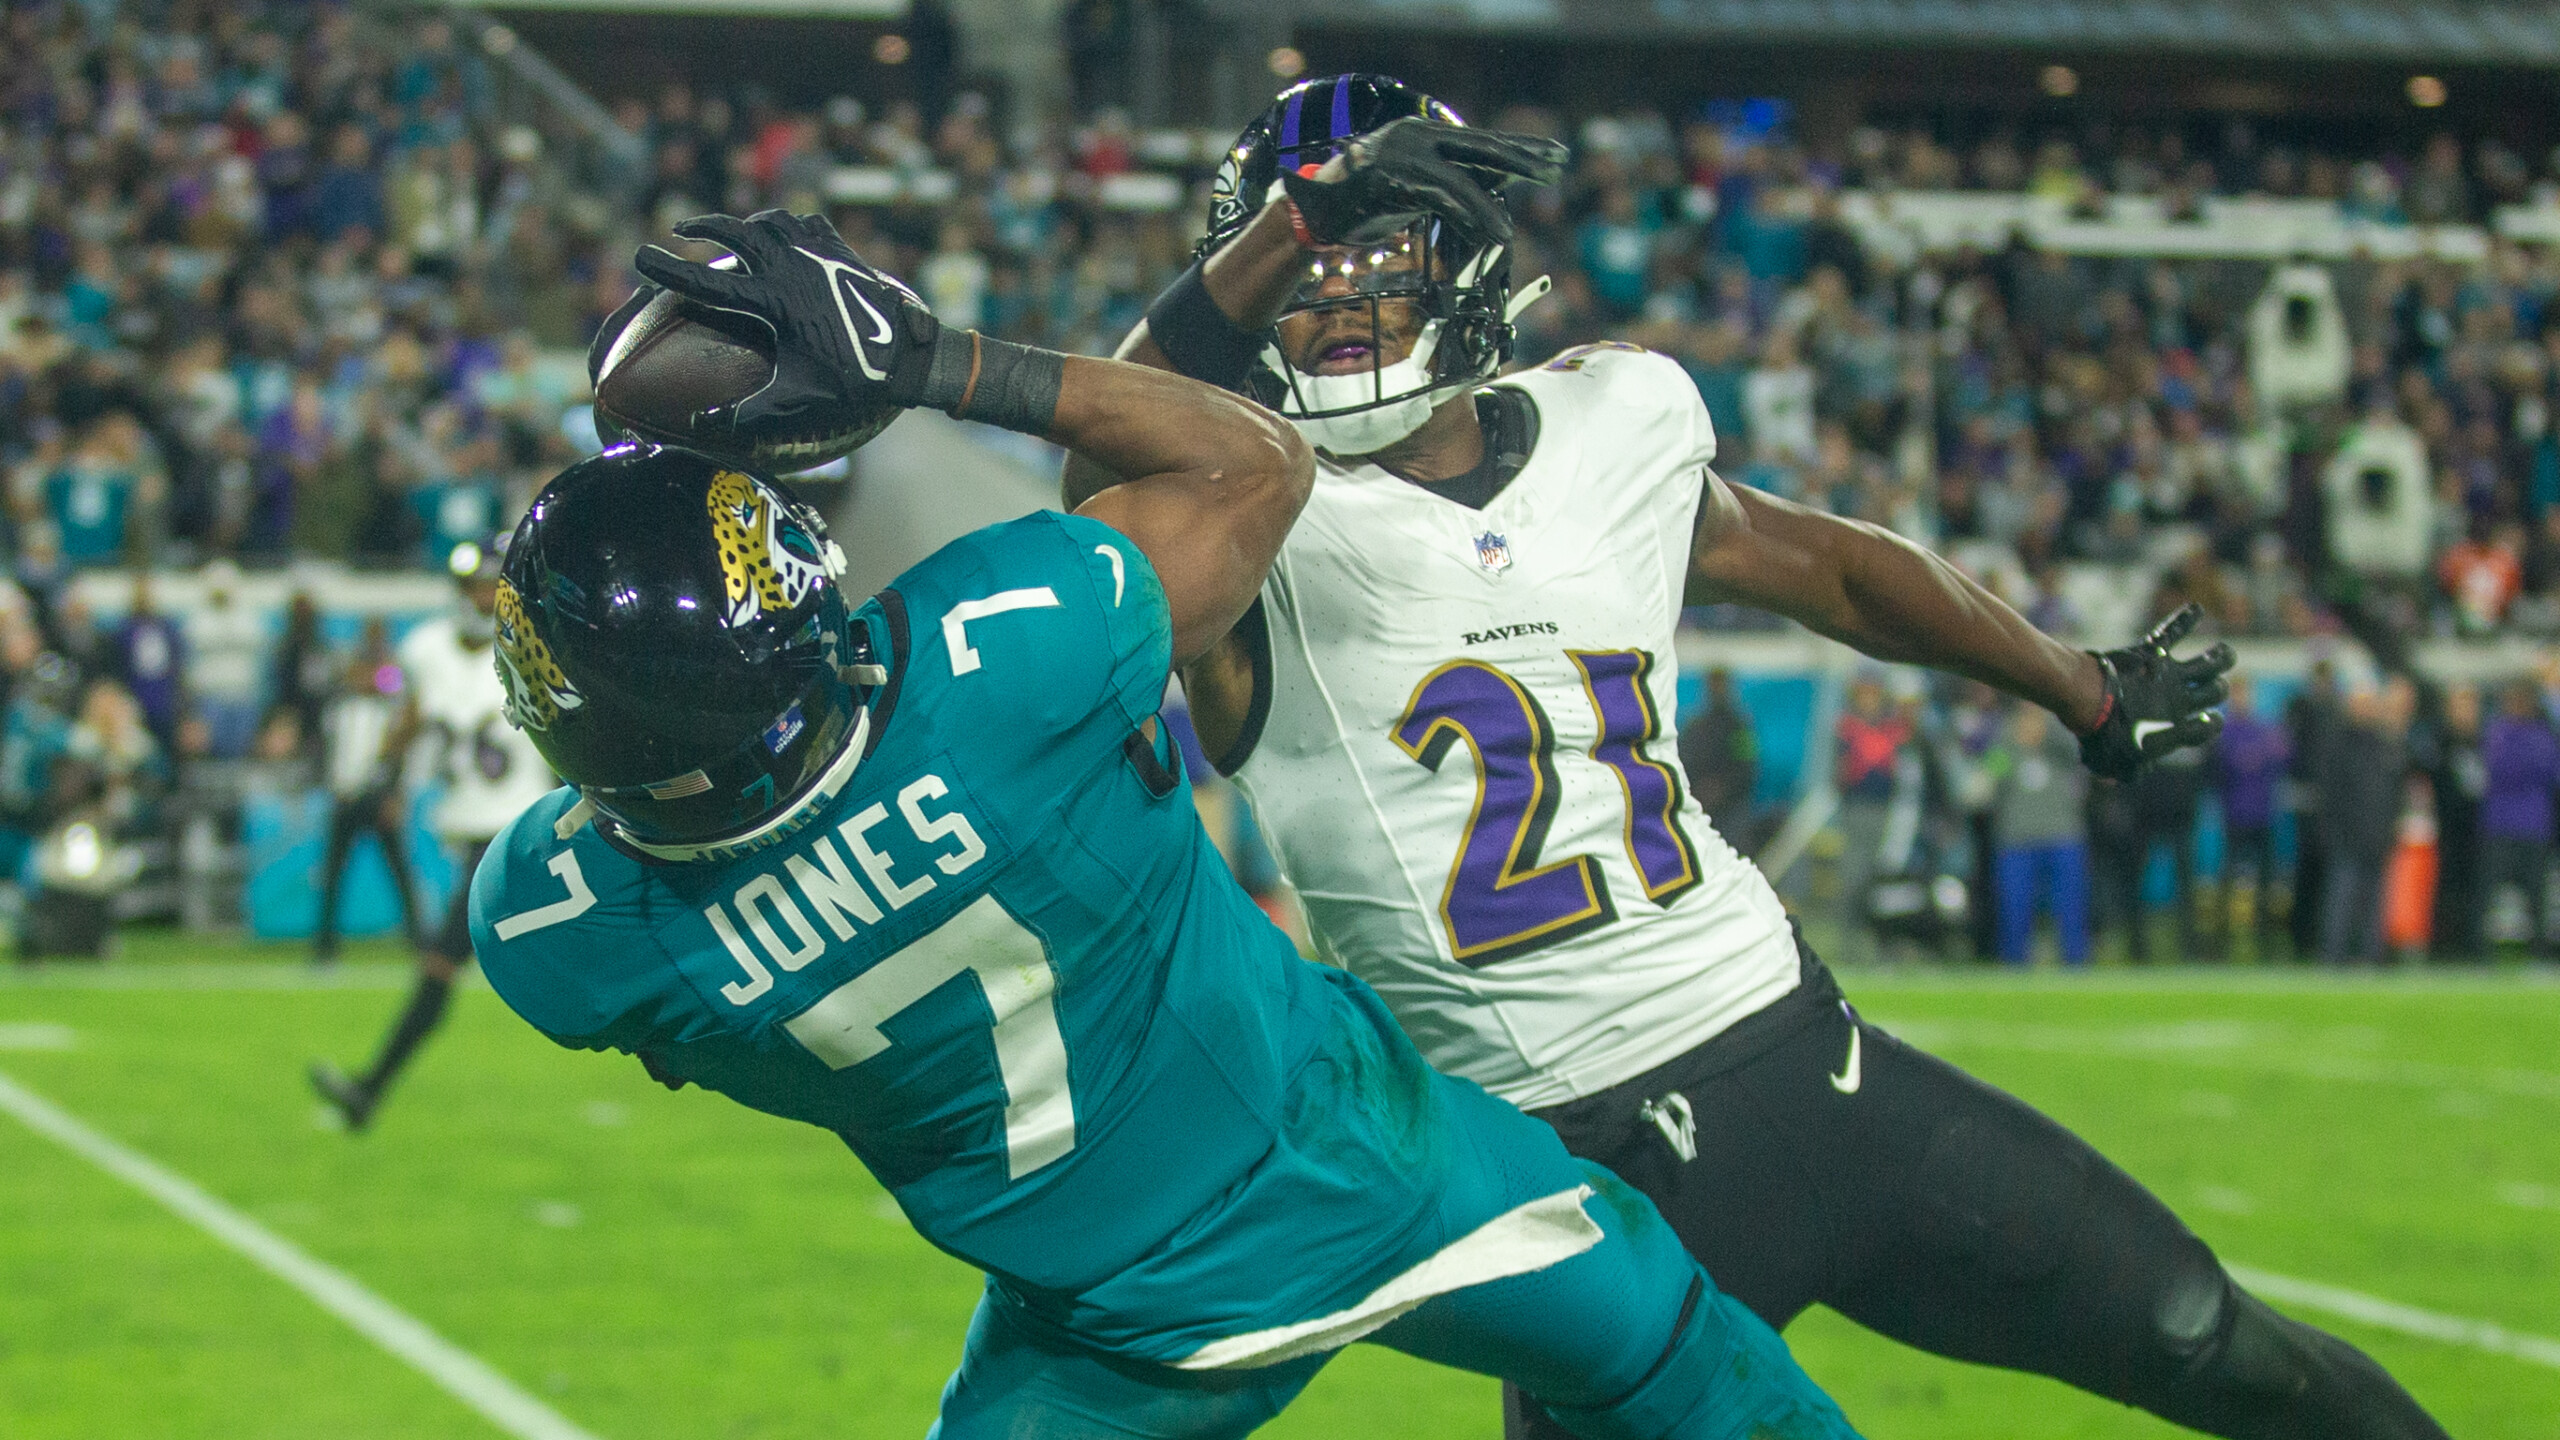 Featured image for “SPORTS | Jags not ready for prime time with third straight loss”